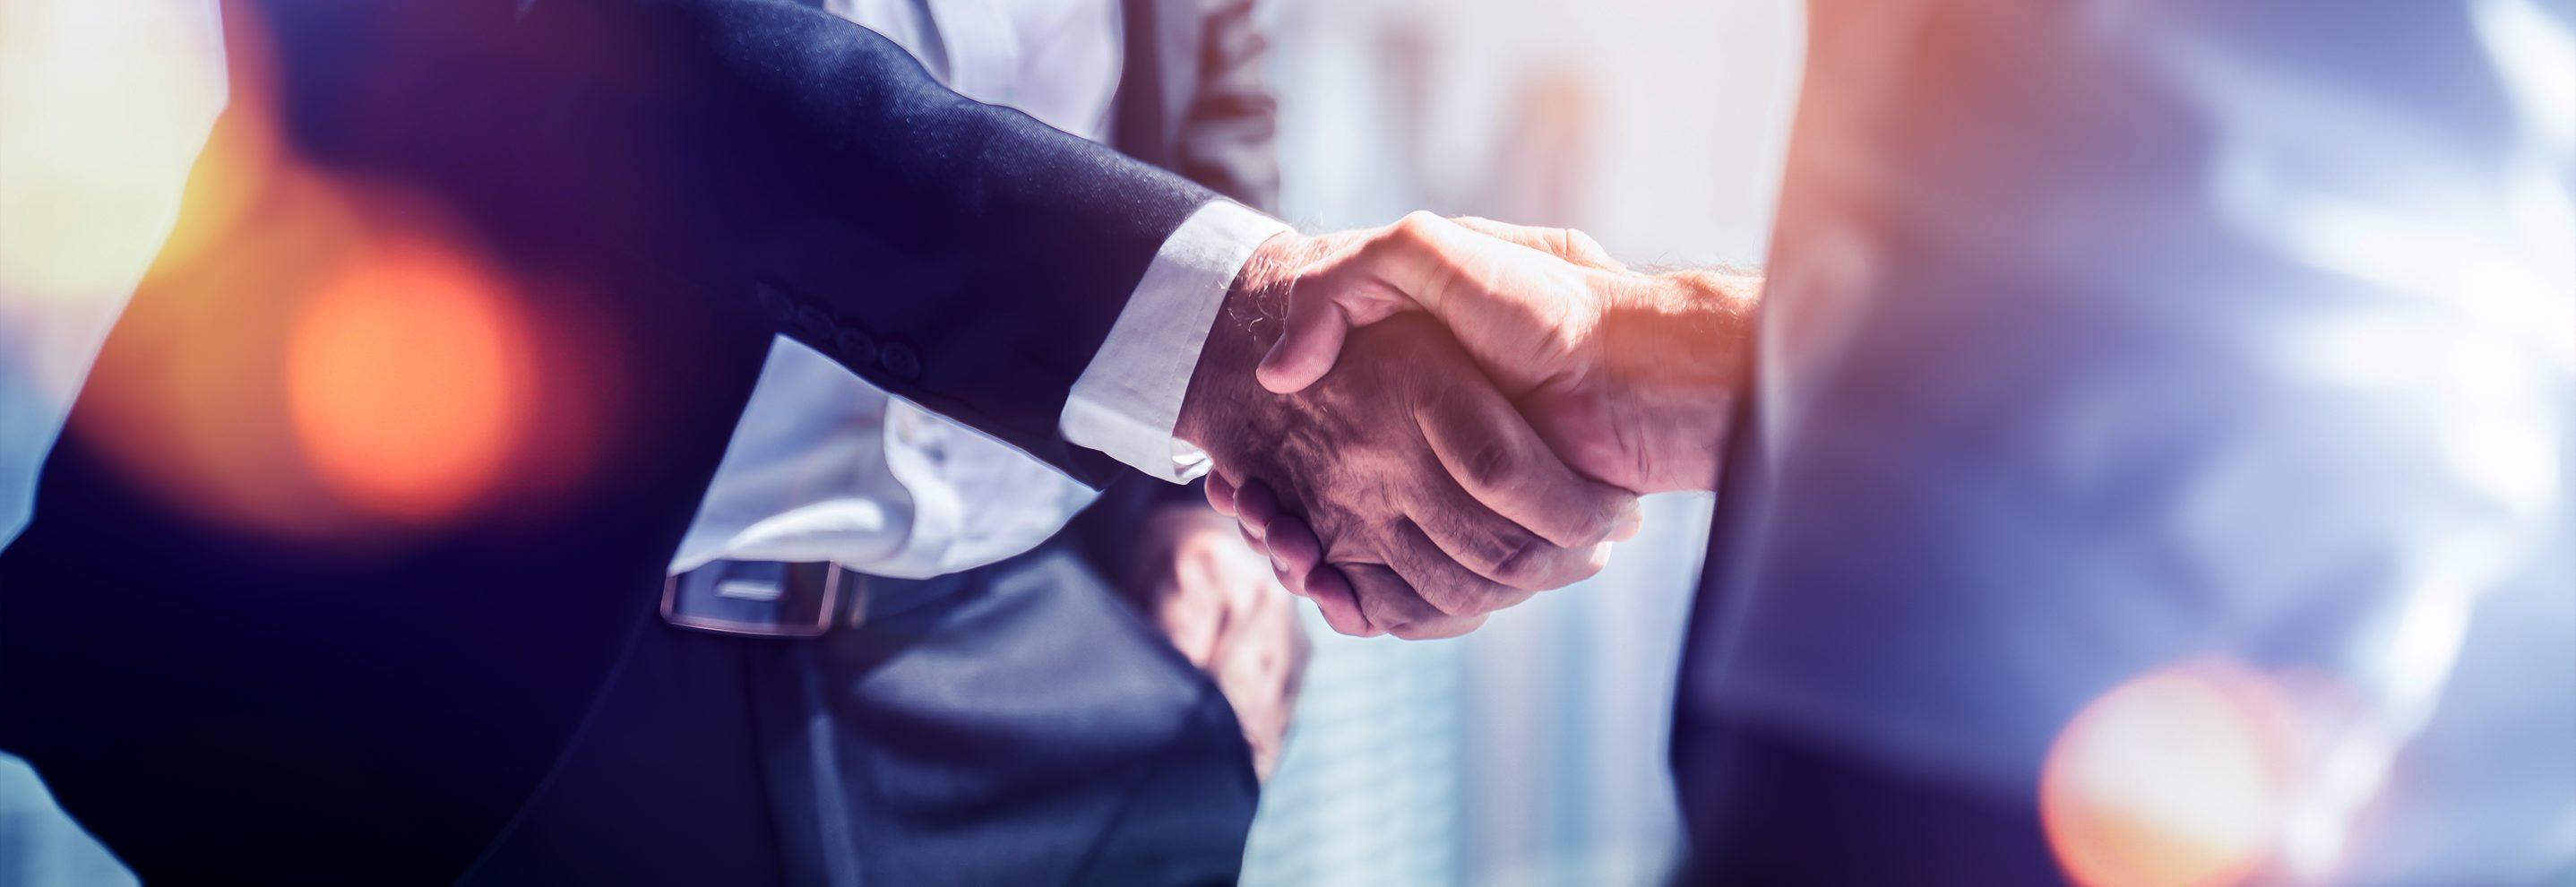 PRESS: BluWave and Sean Mooney in Mergers & Acquisitions June 2019